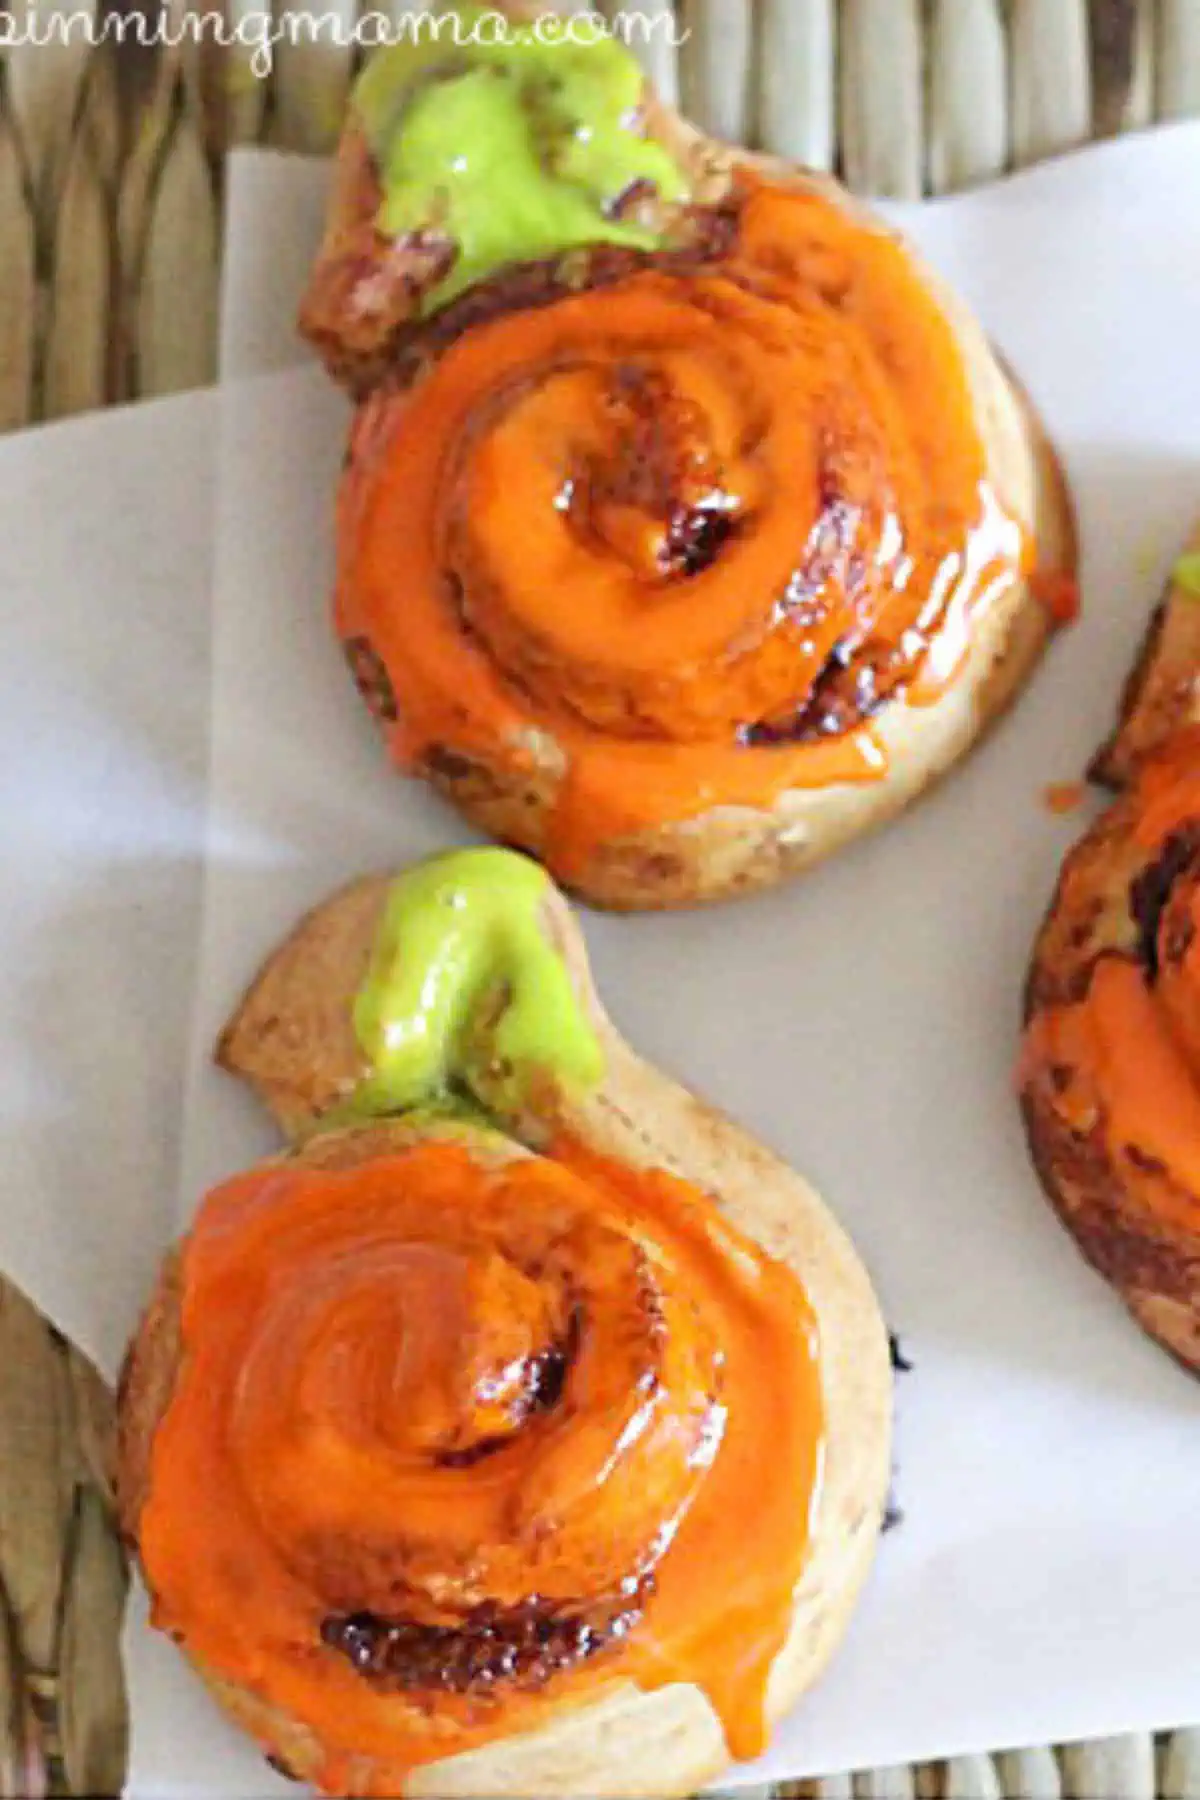 Cinnamon rolls in the shape of pumpkins with orange and green icing